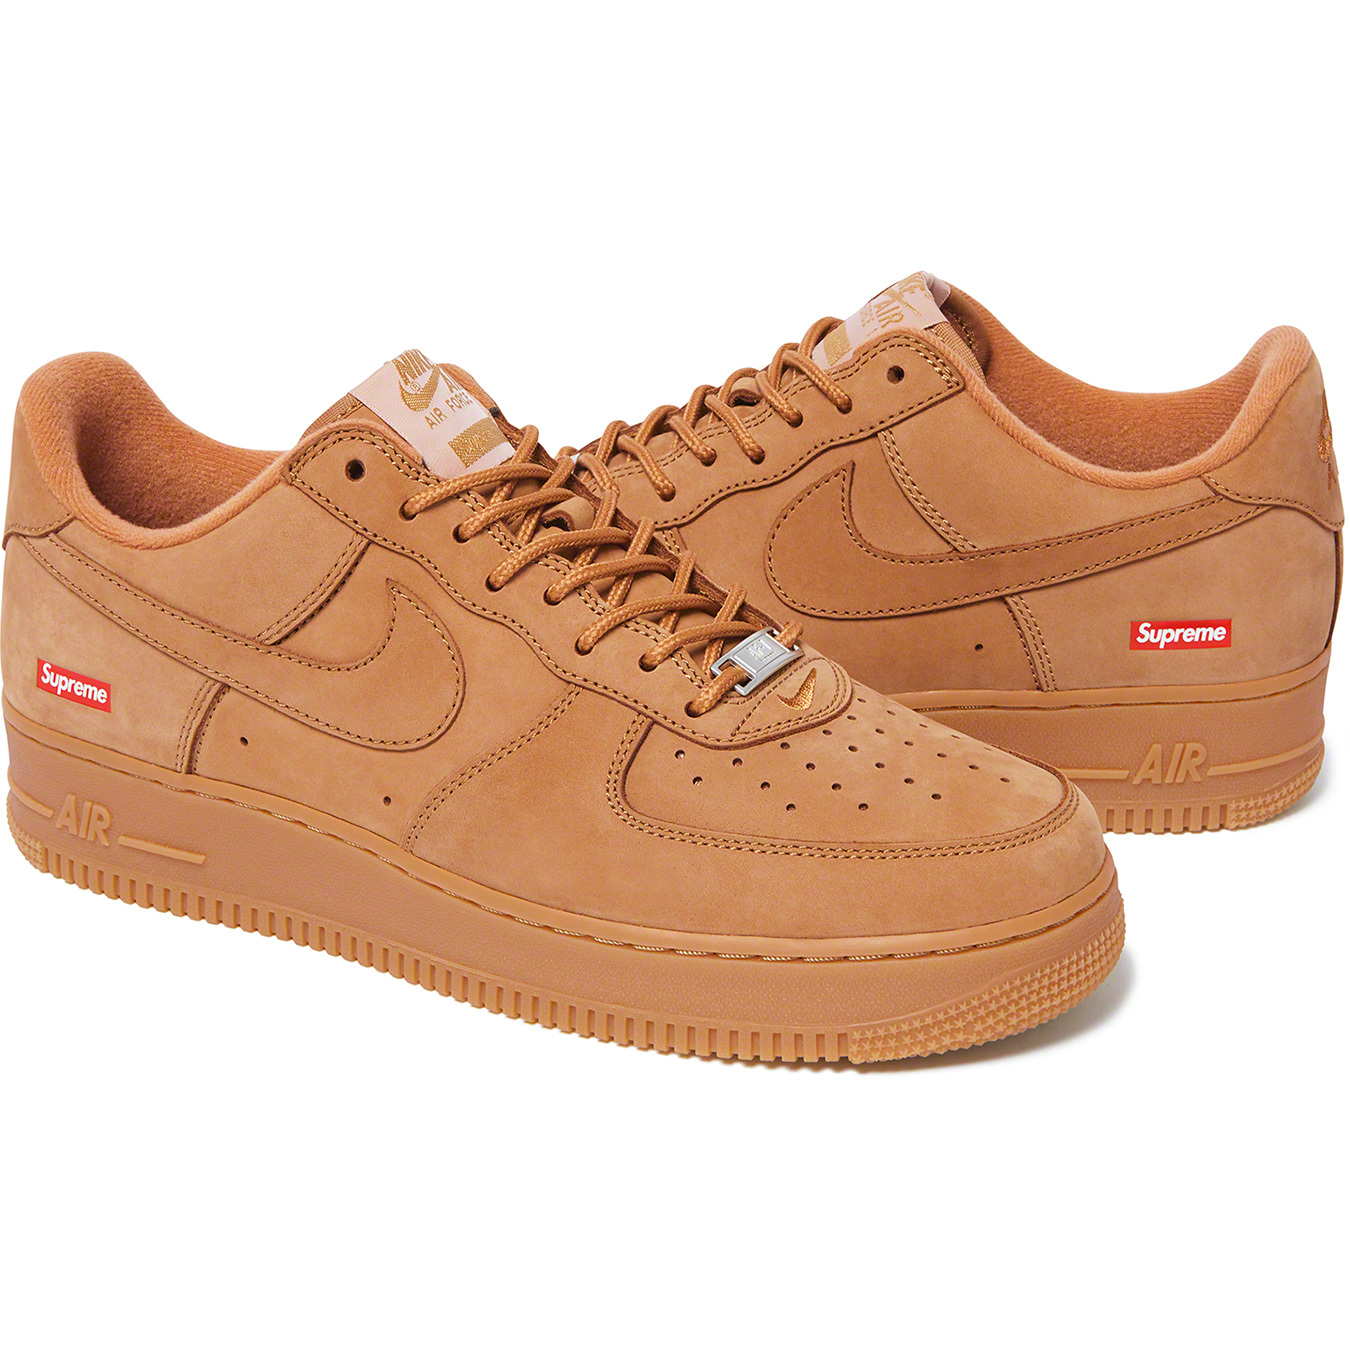 Have you seen the Nike Air Force 1 Low Supreme in rhe wheat colorway?